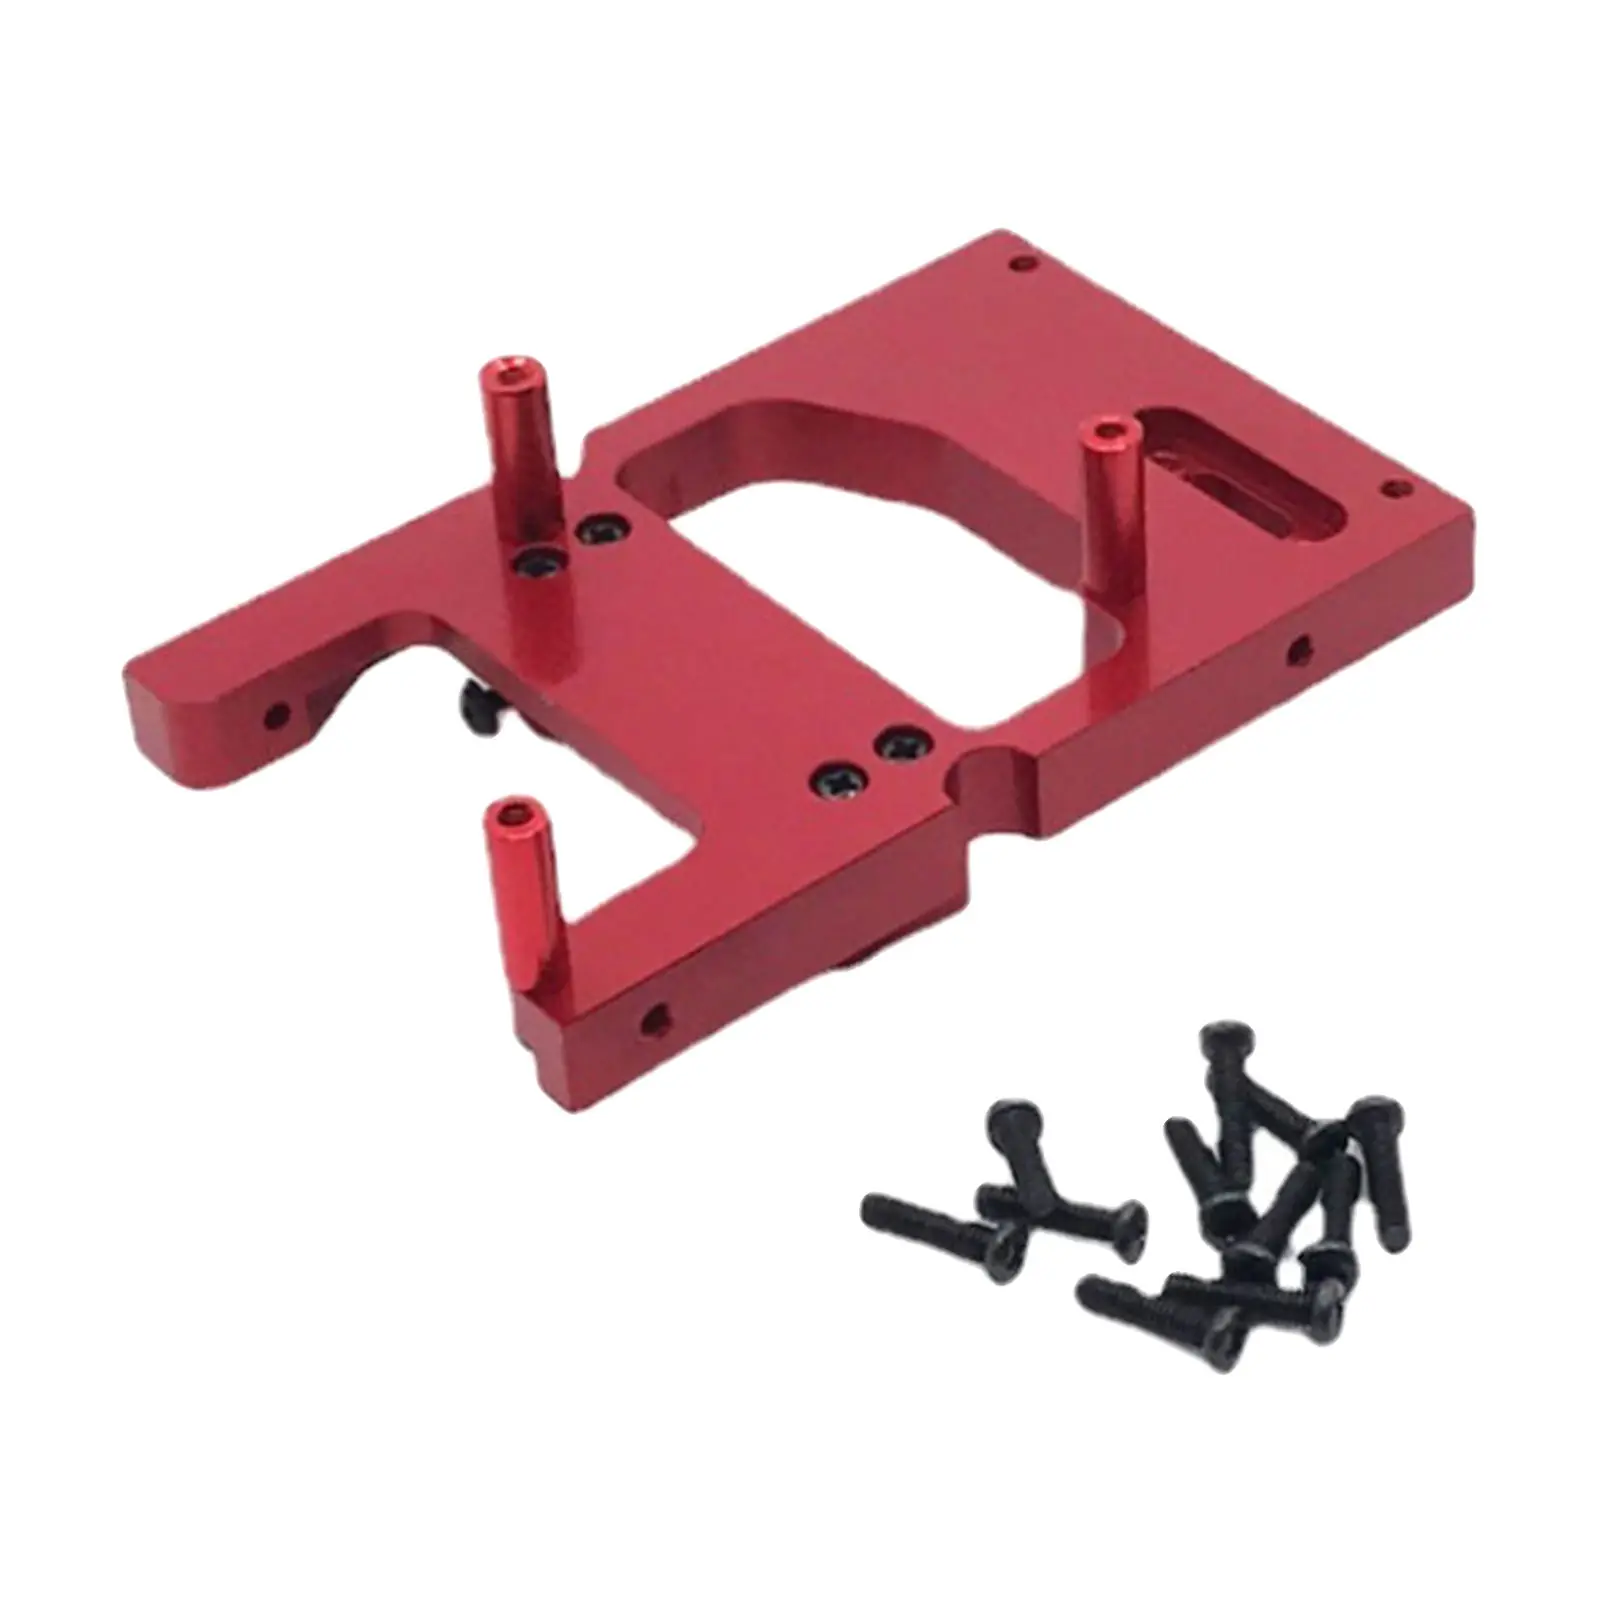 Servo Fixed Mount Bracket Accessories 1/12 Scale Parts Steering Gear Warehouse for MN Truck